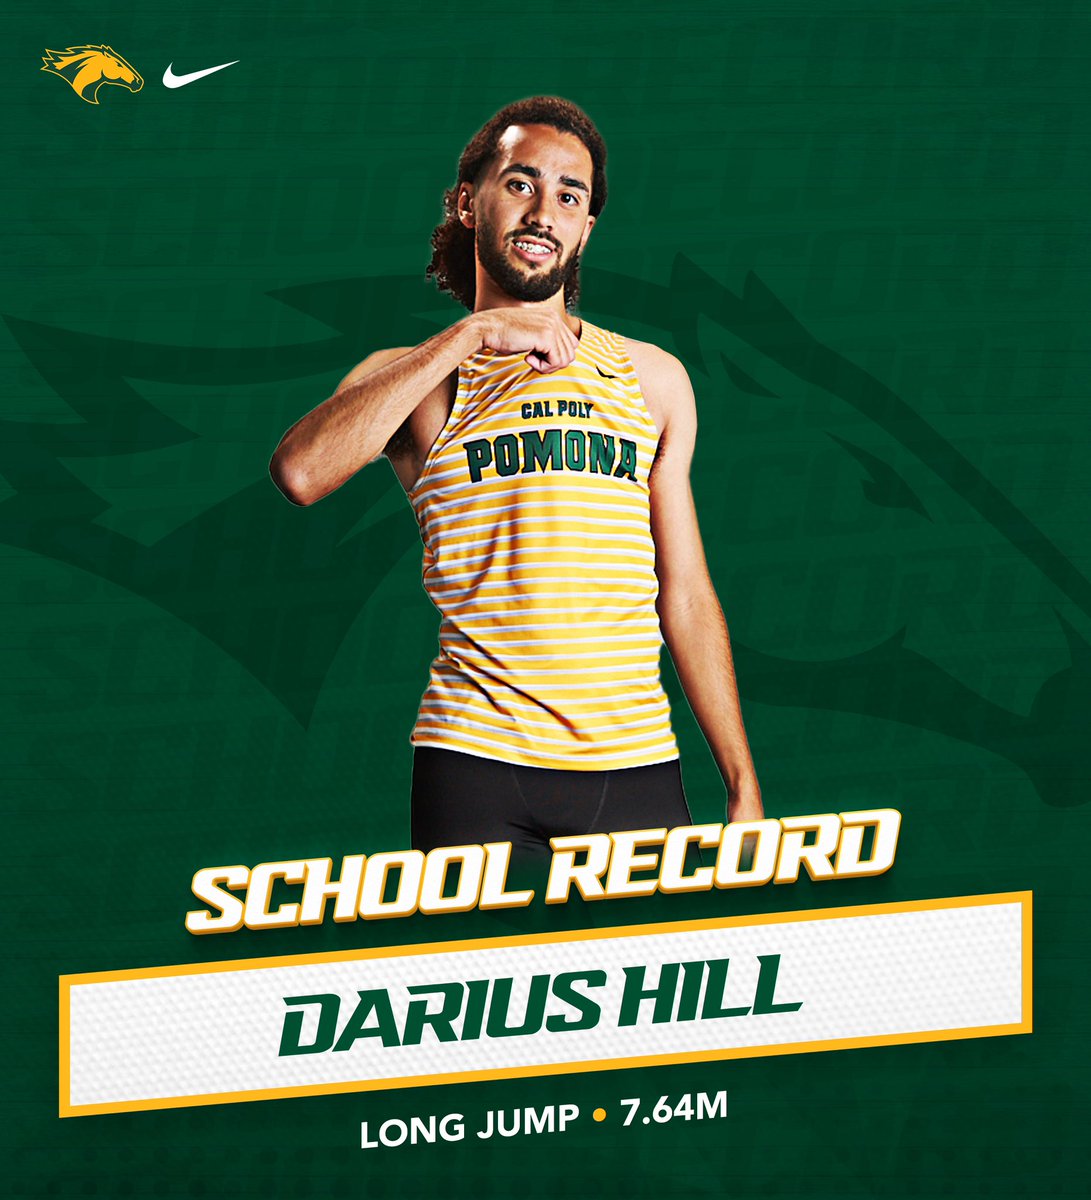 SCHOOL RECORD ‼️ Congratulations to Darius Hill for breaking the @CPPxctf record in the long jump yesterday at 7.64 meters to become the CCAA Champion 🙌